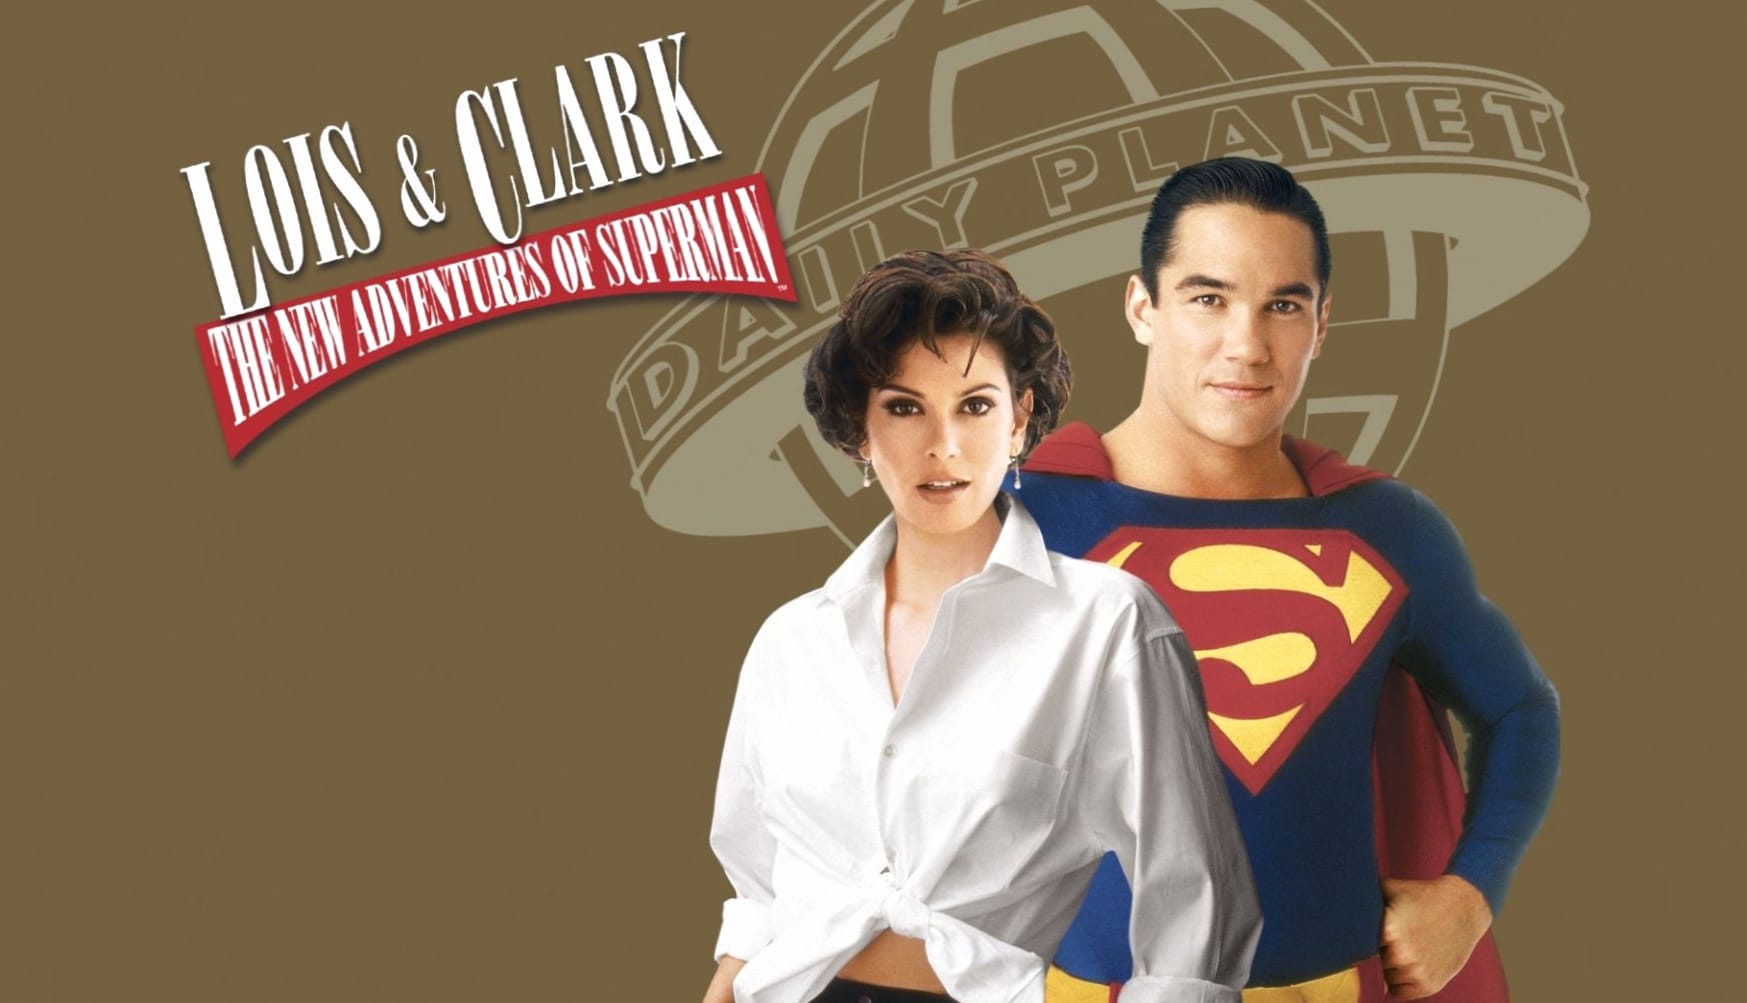 Lois Clark The New Adventures of Superman wallpapers HD quality